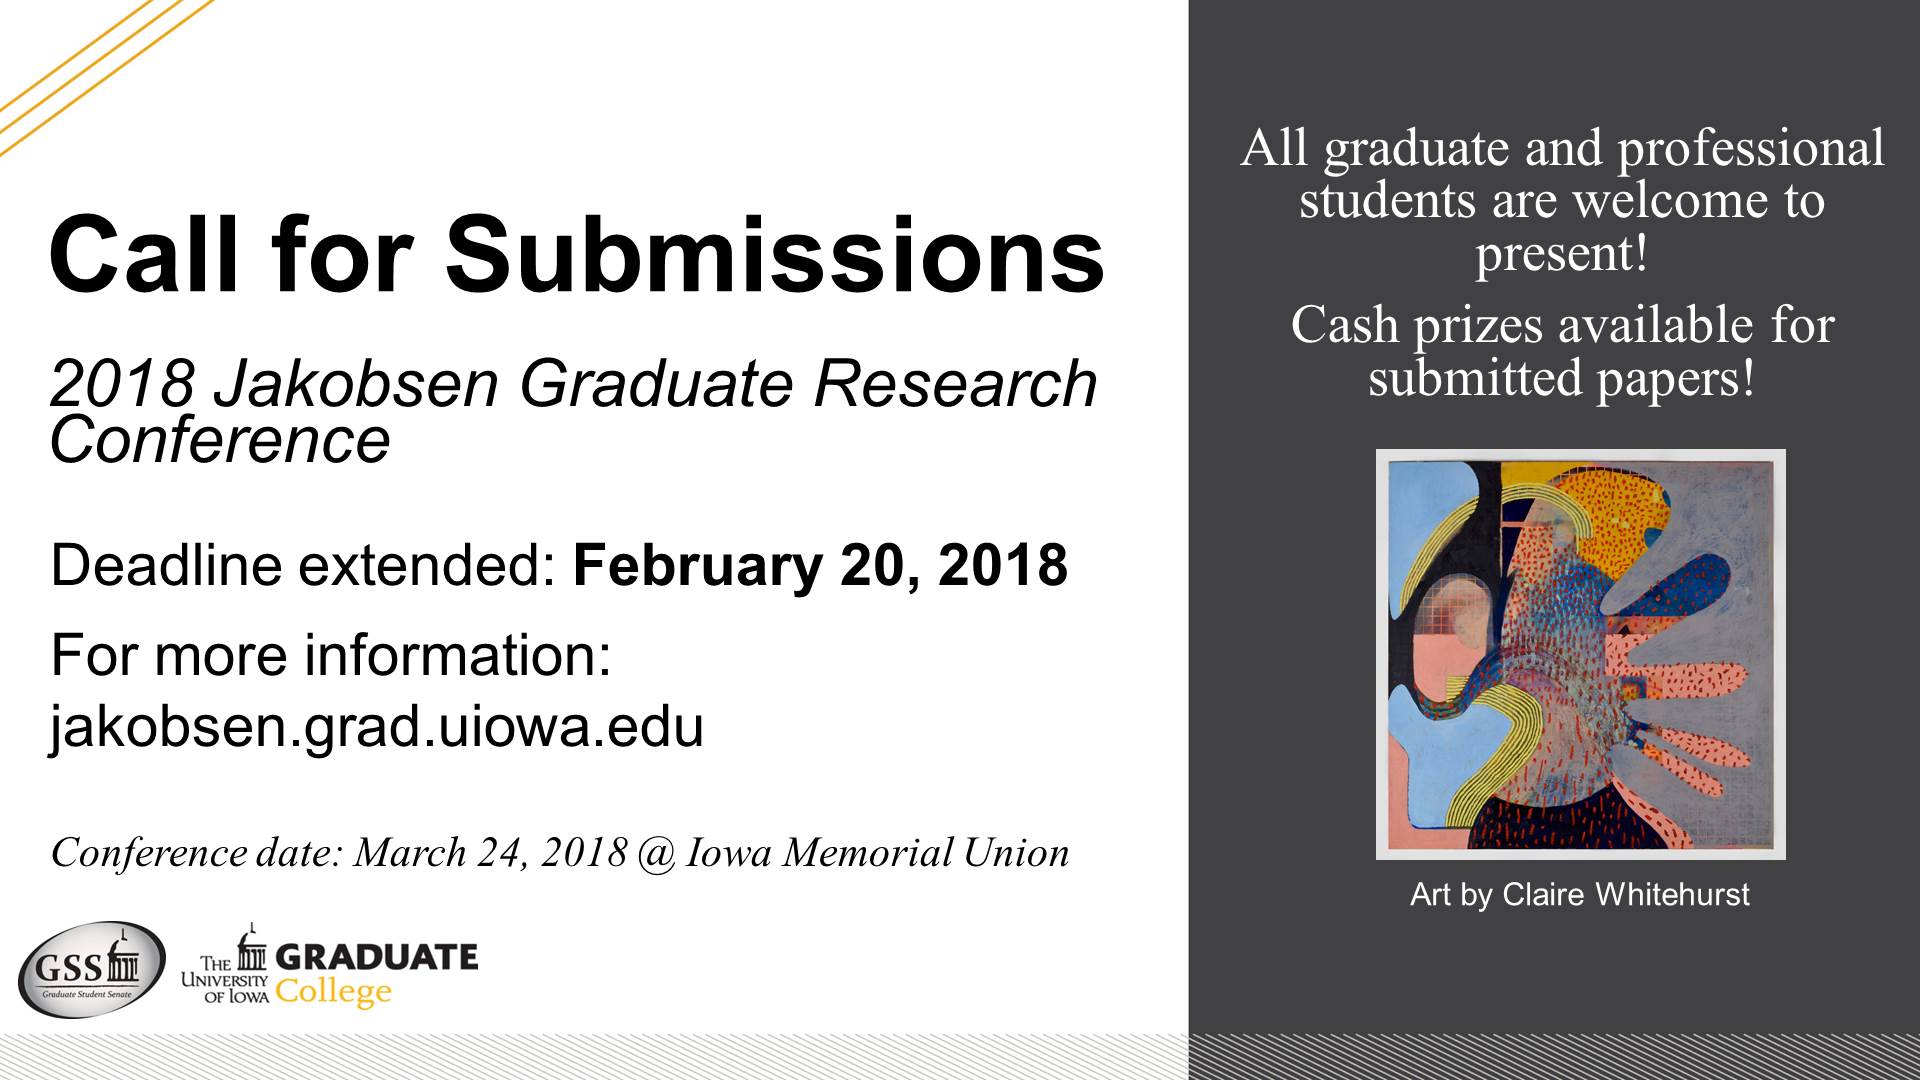 2018 Jakobsen Graduate Research Conference